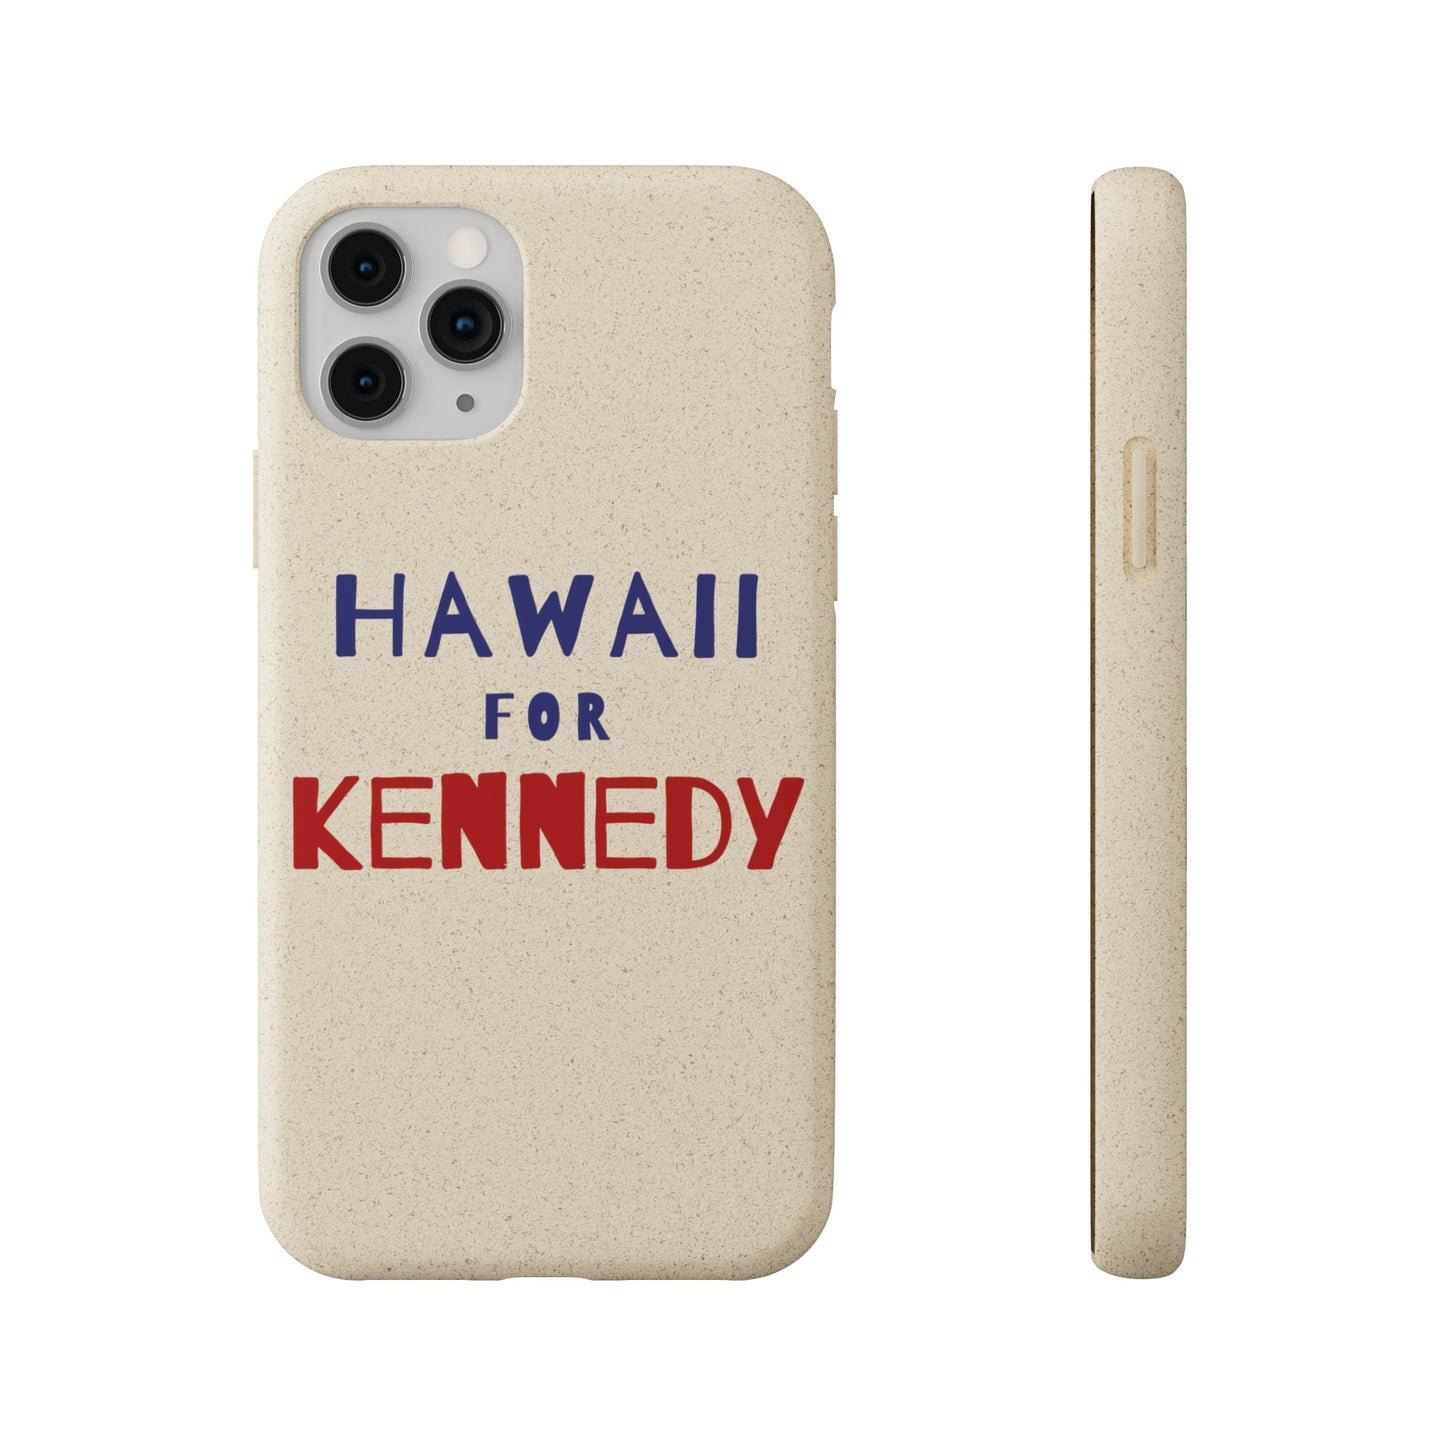 Hawaii for Kennedy Biodegradable Phone Case - TEAM KENNEDY. All rights reserved